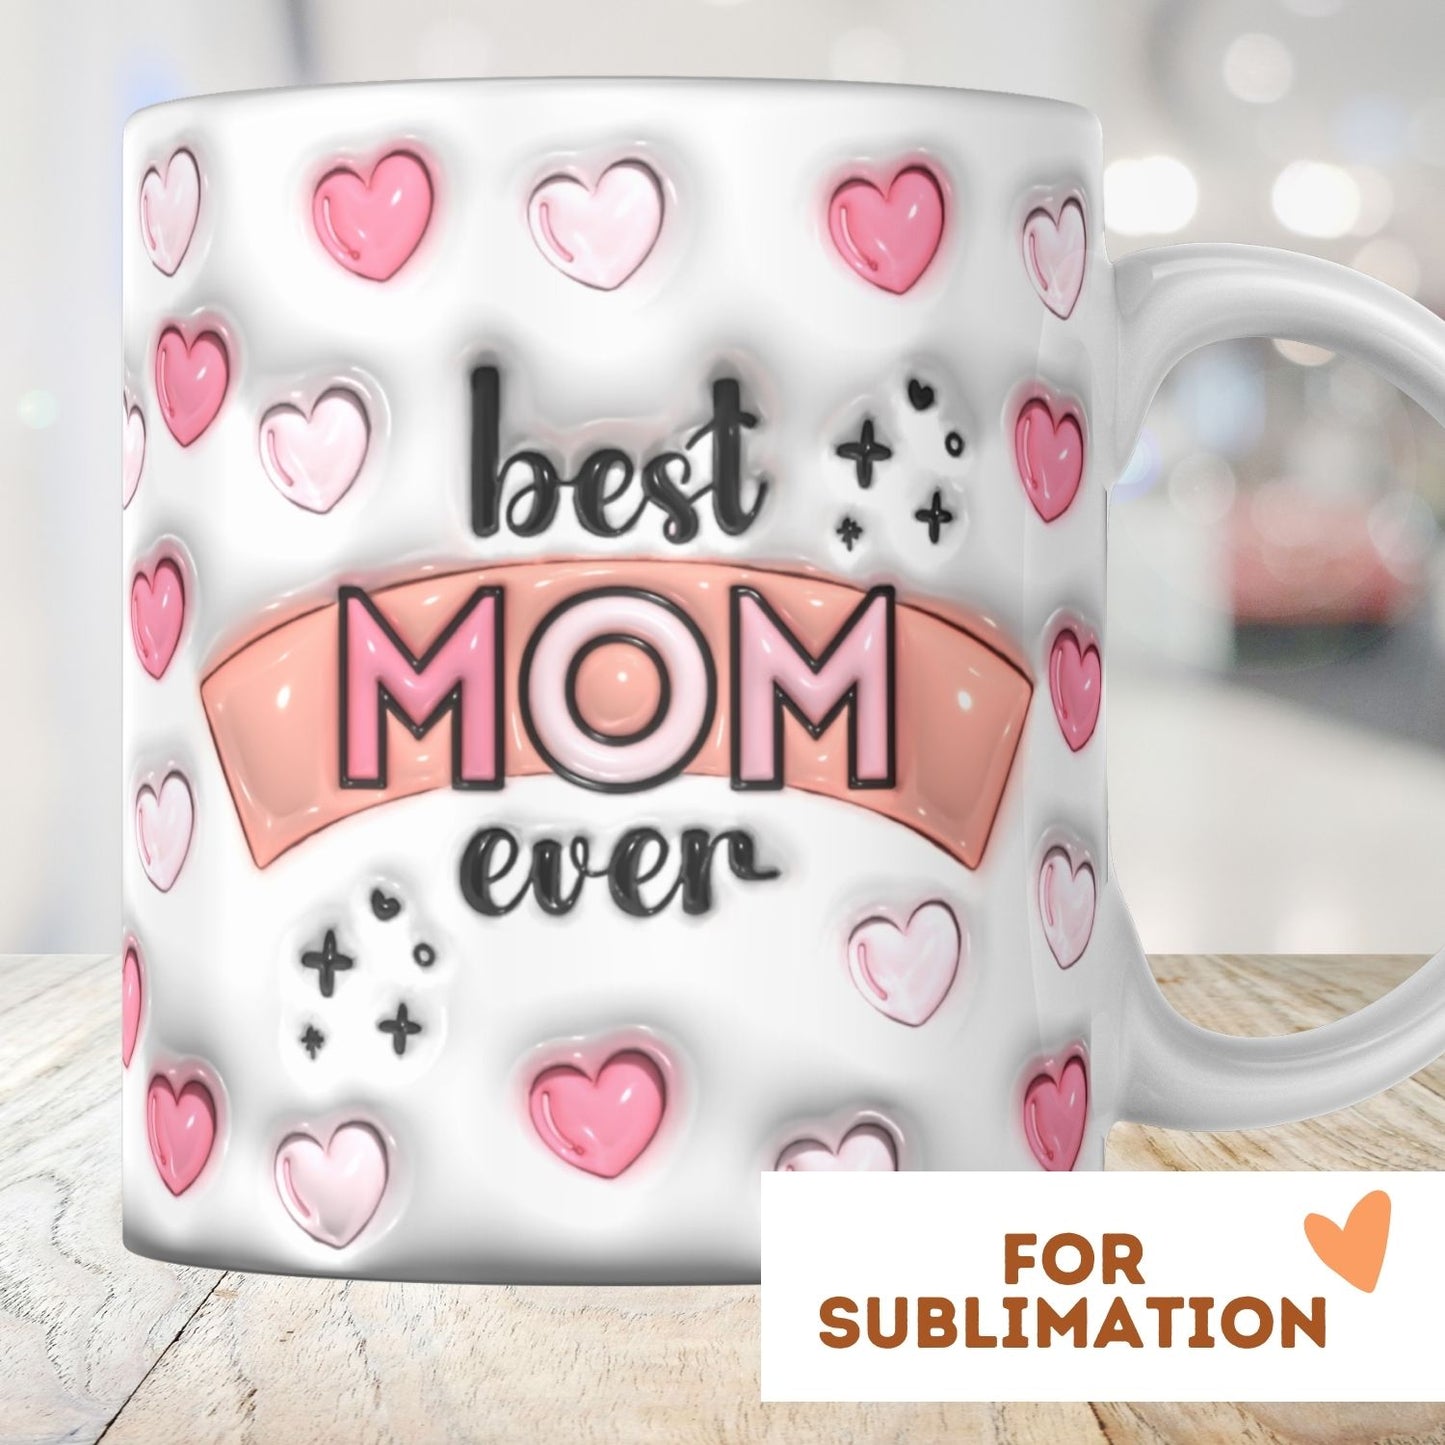 Best Mom Ever - 3D